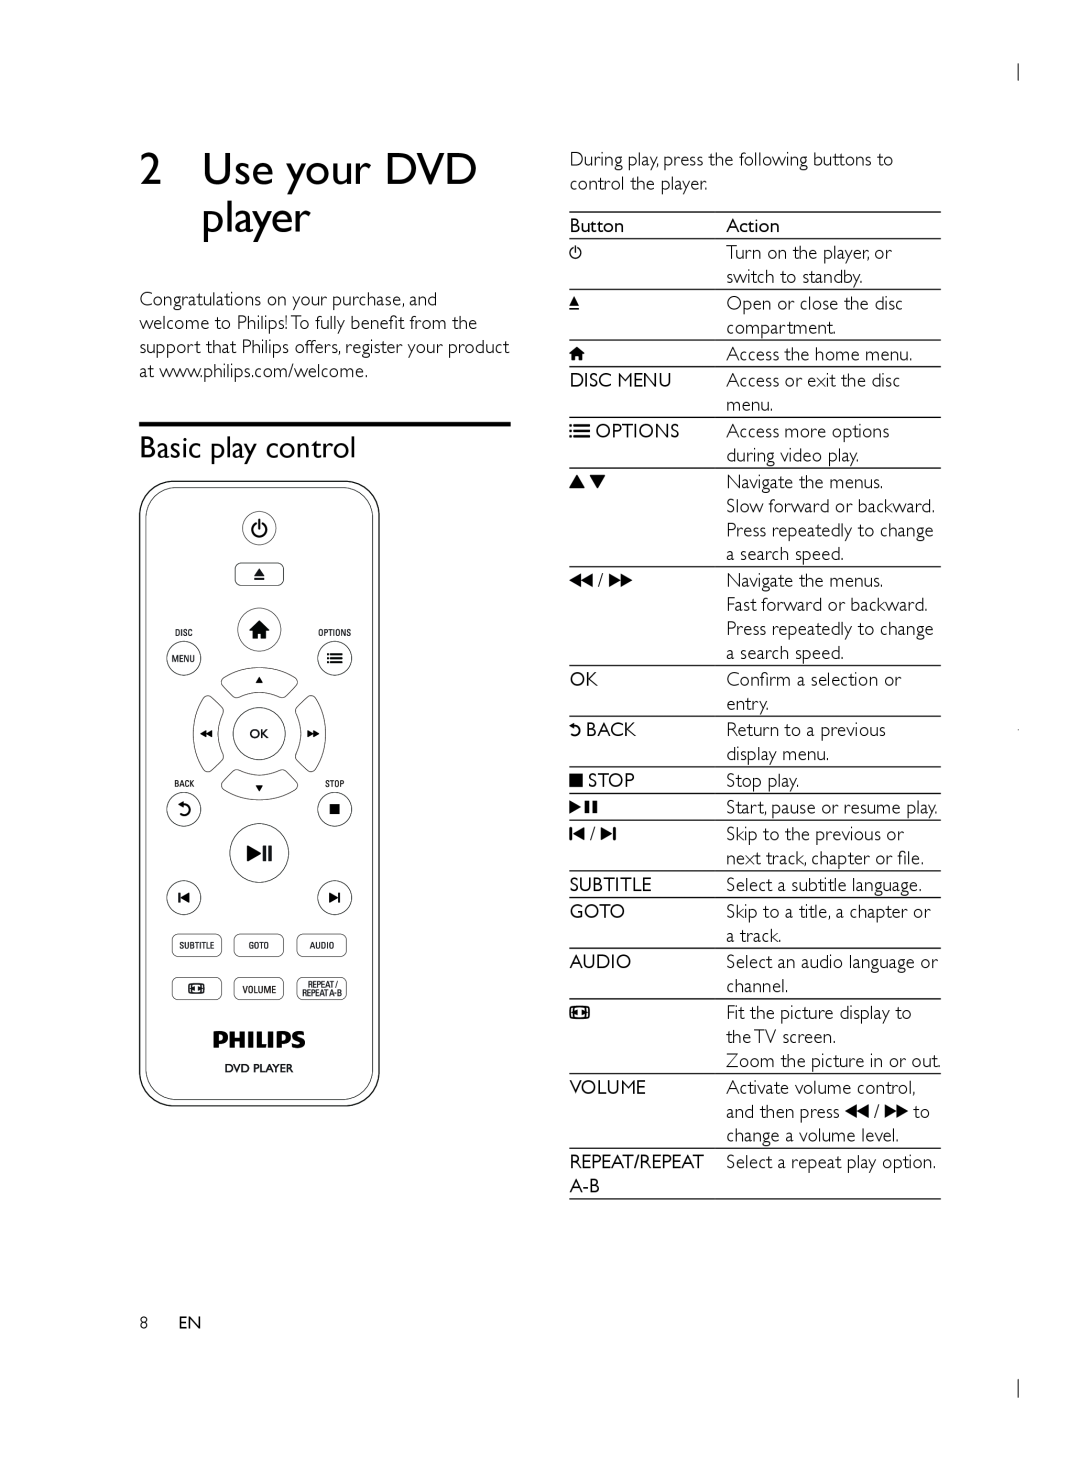 Philips DVP3950 user manual 2Use your DVD player, Basic play control 